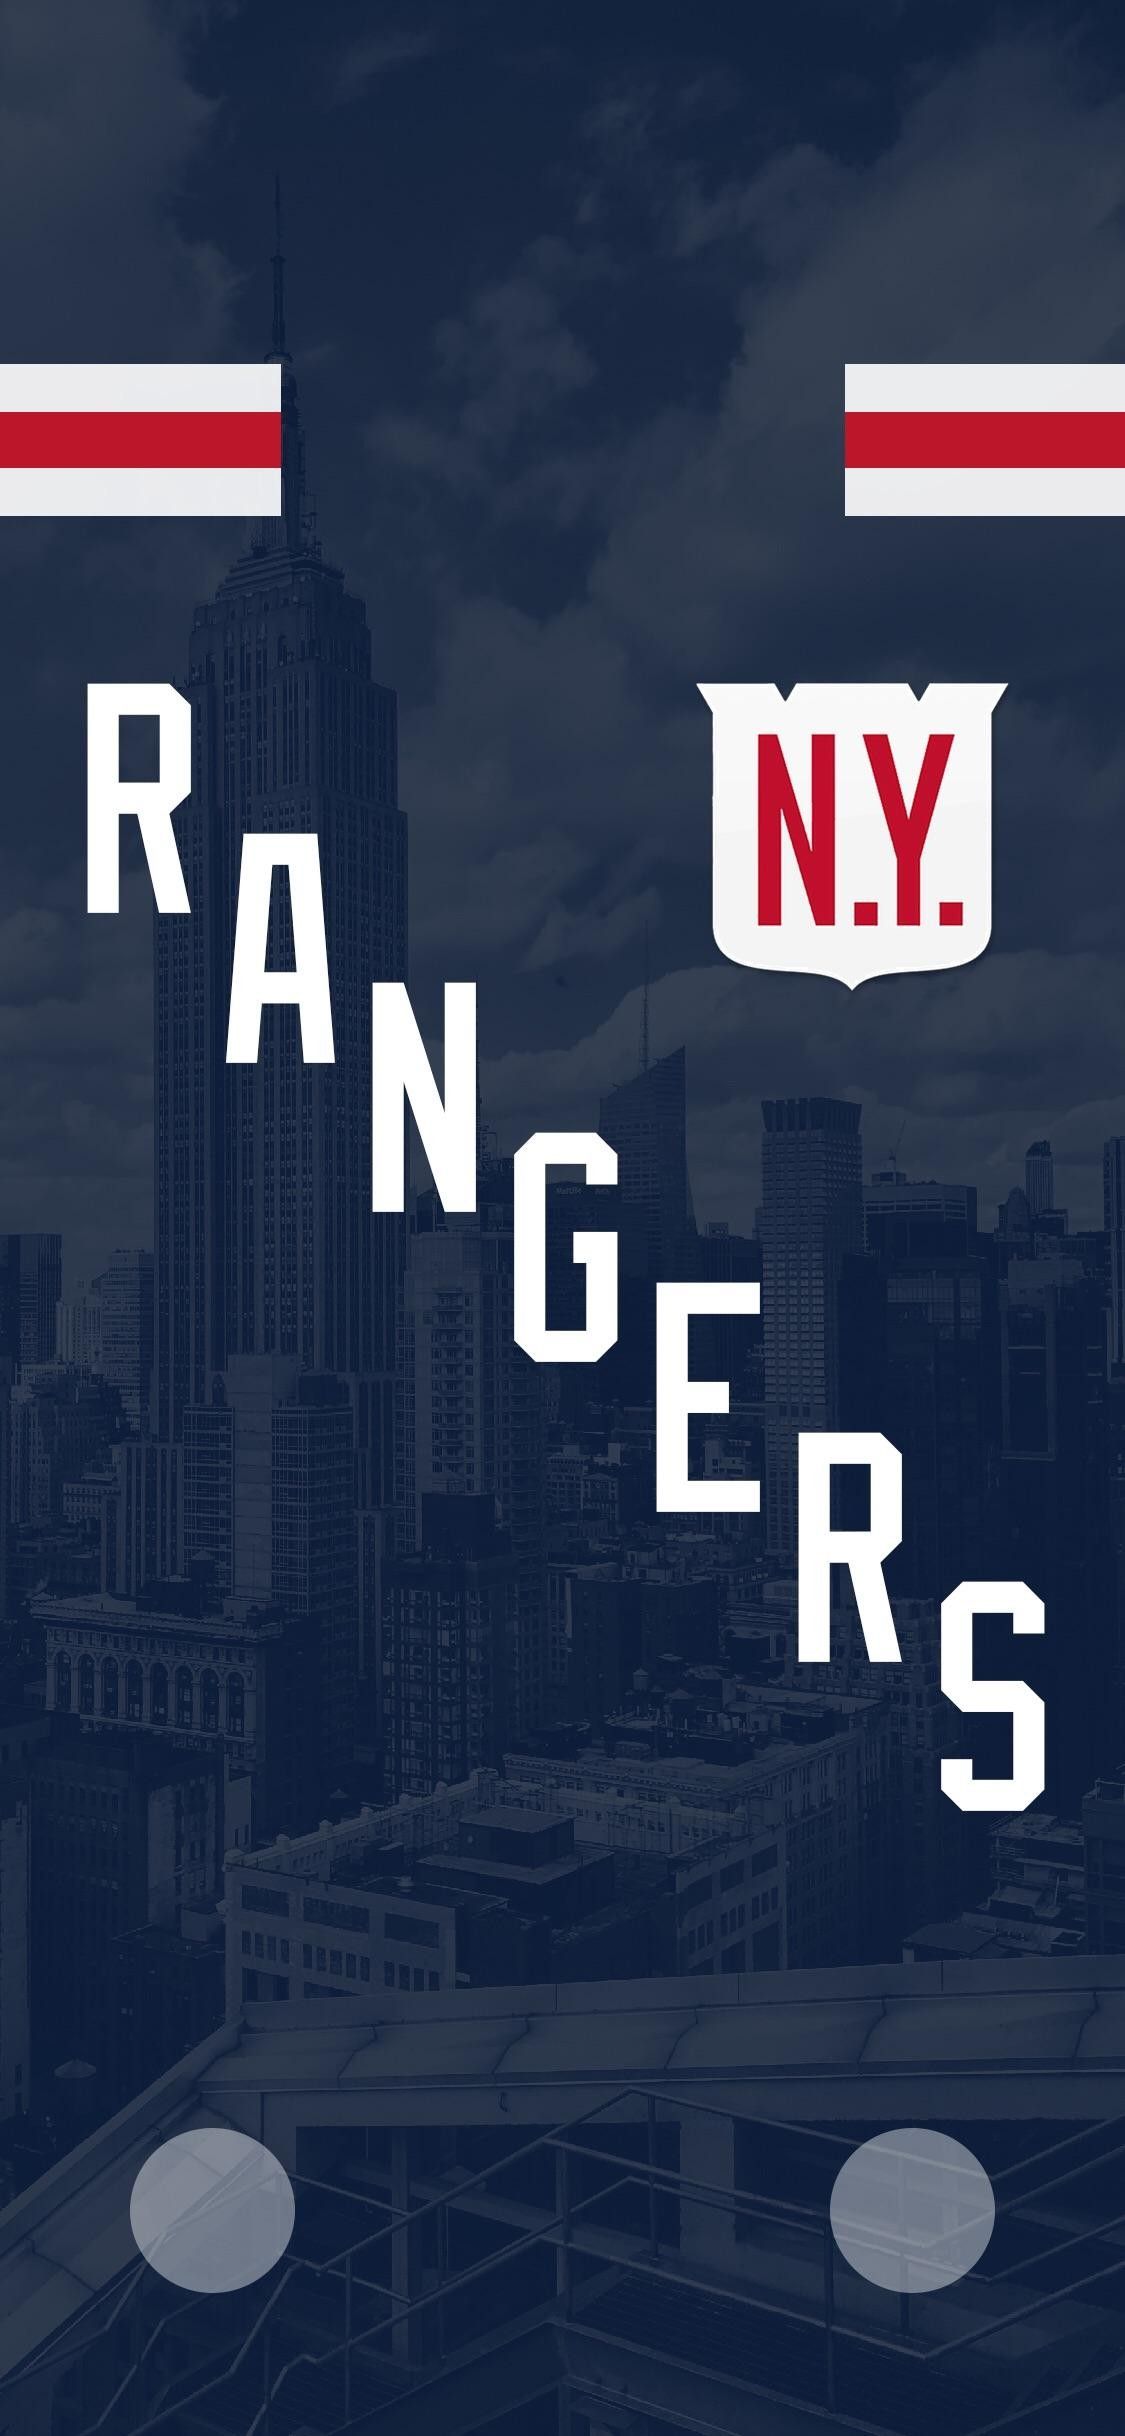 Download New York Rangers wallpapers for mobile phone, free New